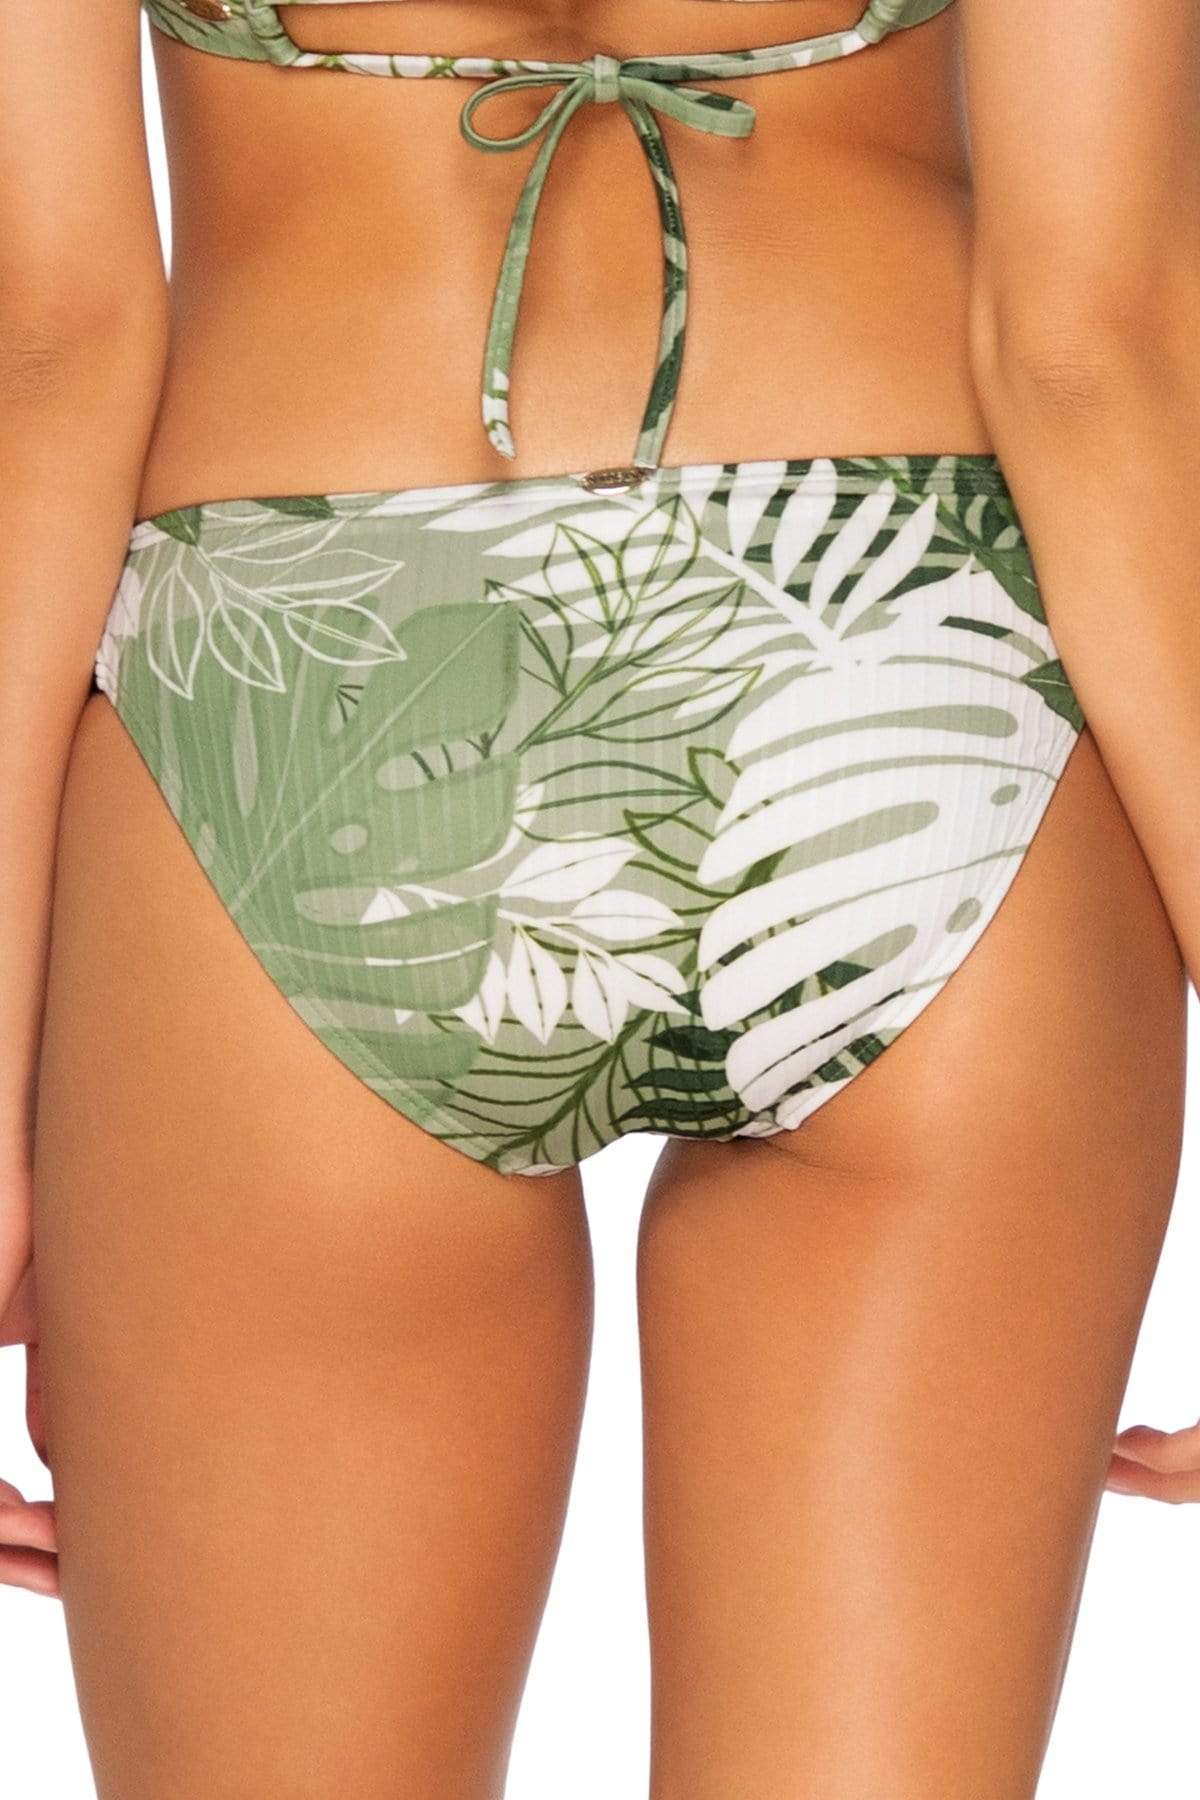 Bestswimwear -  Sunsets Palm Grove Femme Fatale Hipster